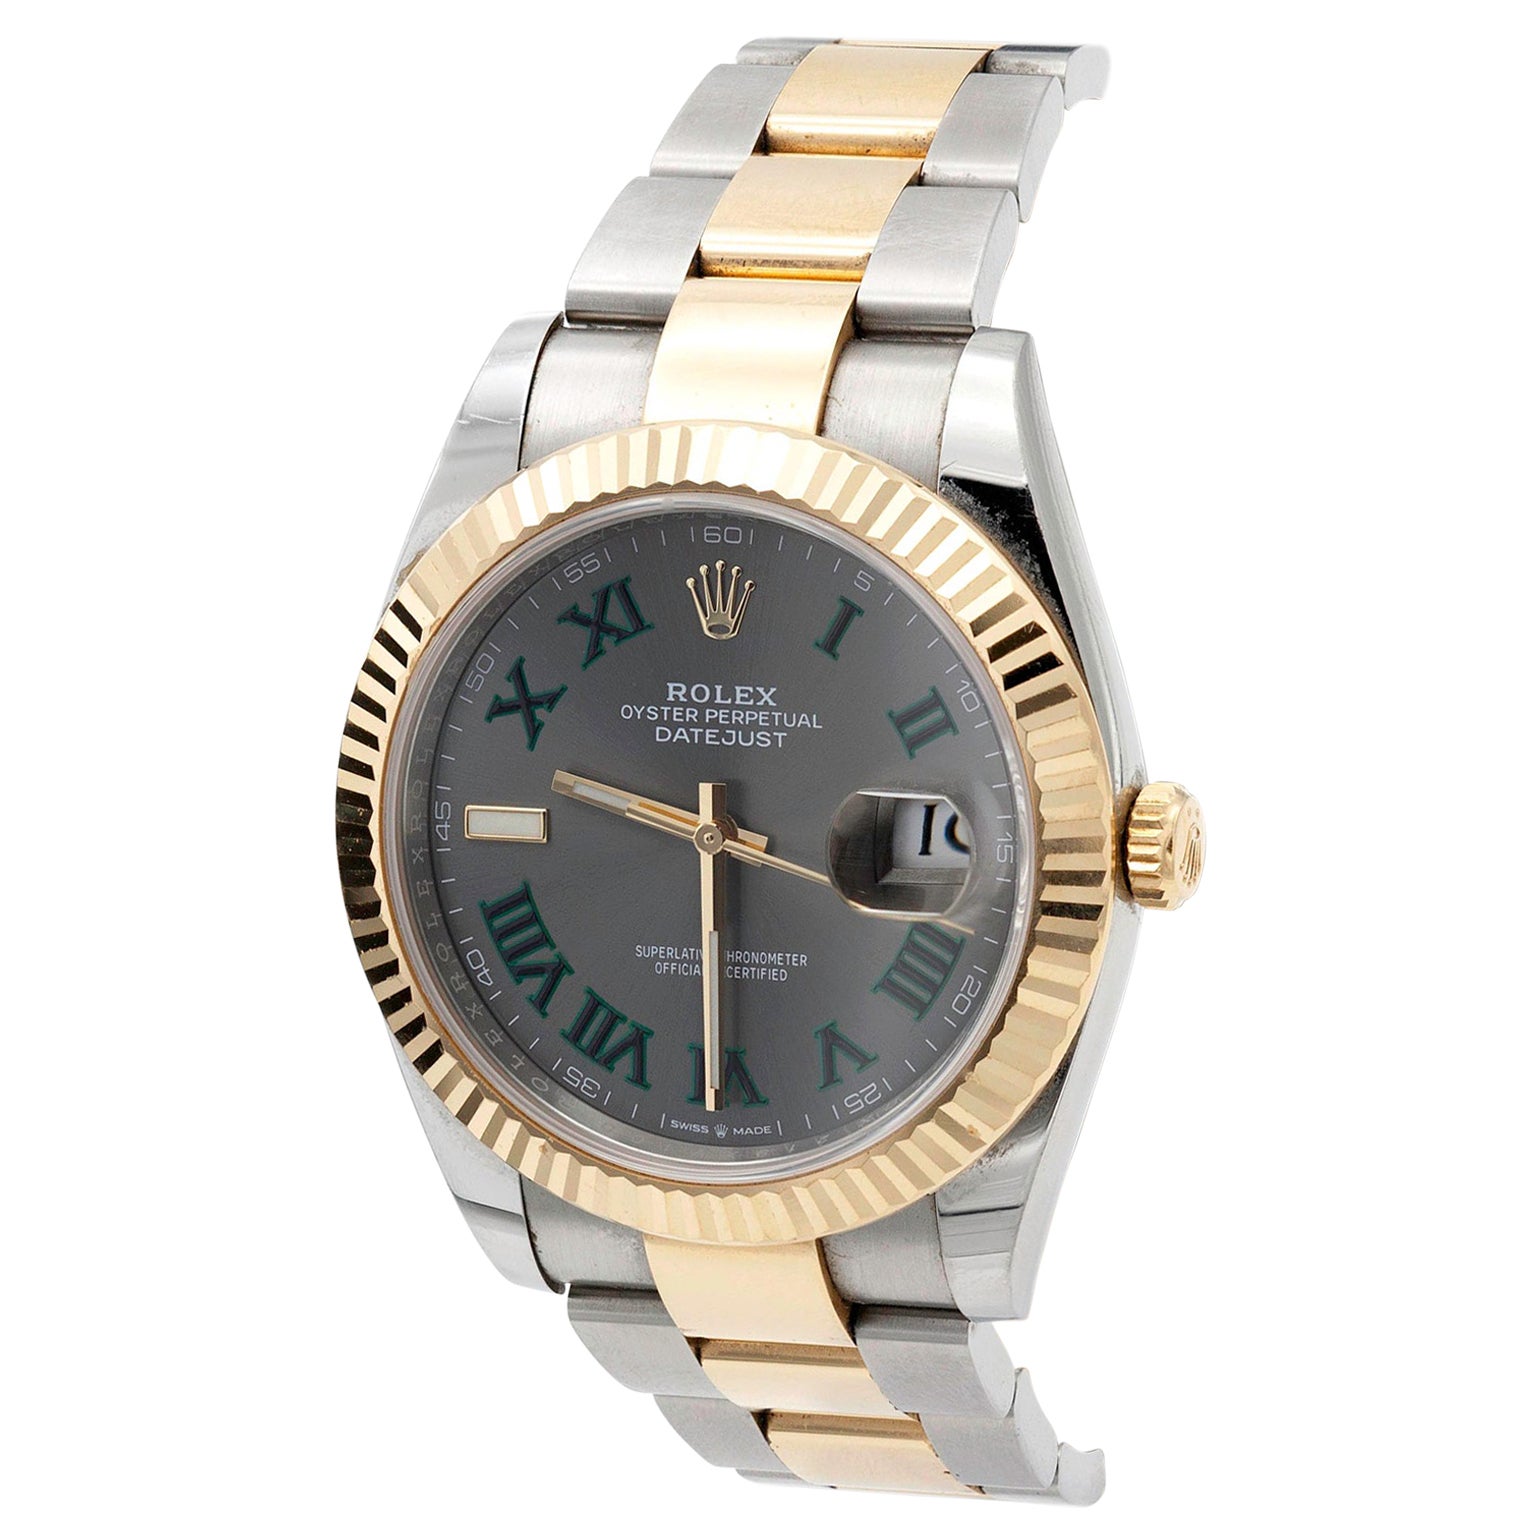 Rolex Datejust 41 Yellow Gold and Stainless Steel 12633 Men's Watch For Sale